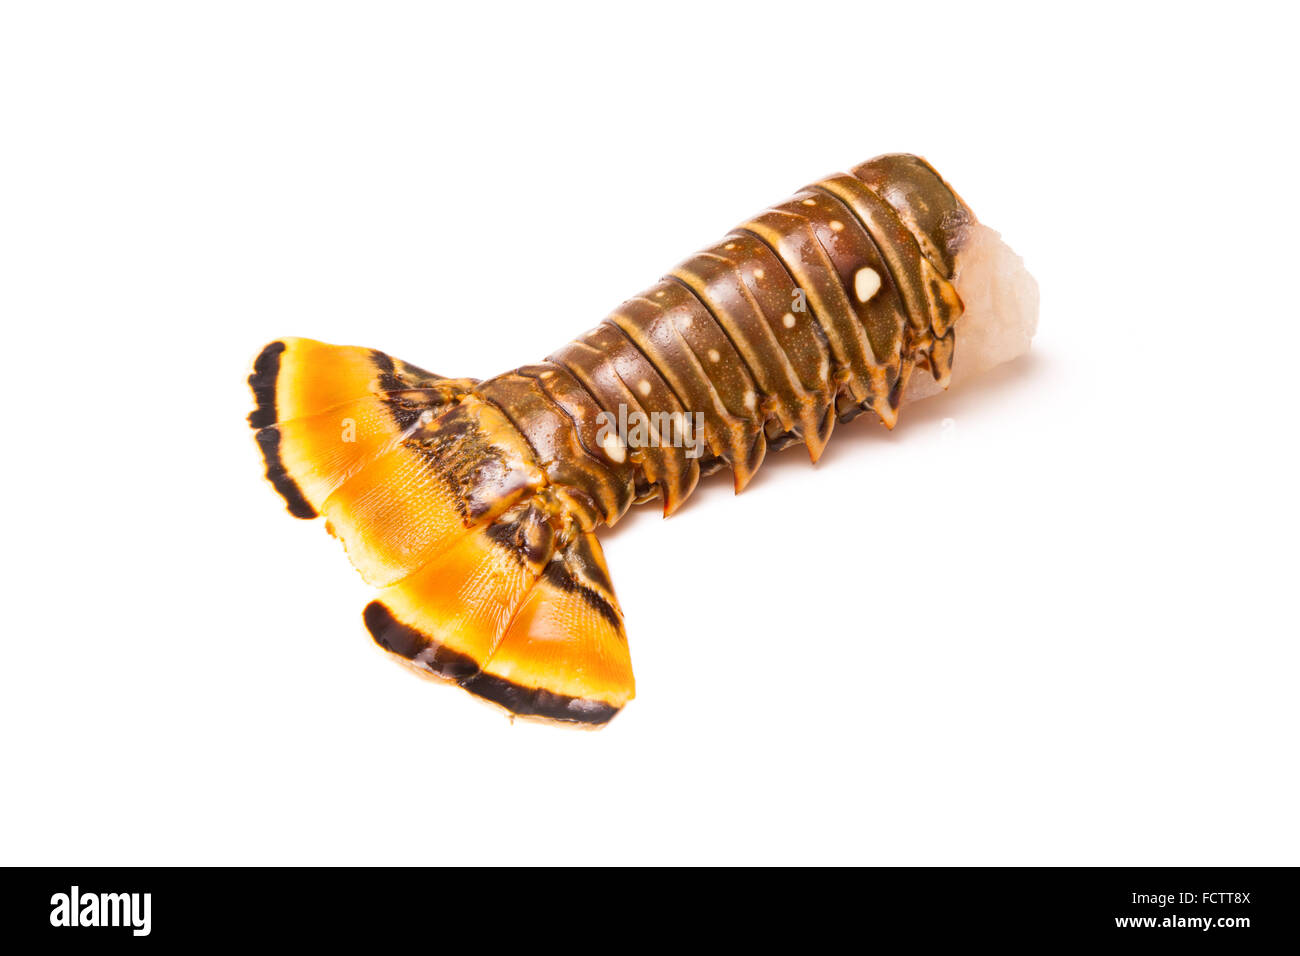 Raw Caribbean ( Bahamas ) rock lobster (Panuliirus argus) or spiny lobster tail isolated on a white studio background. Stock Photo